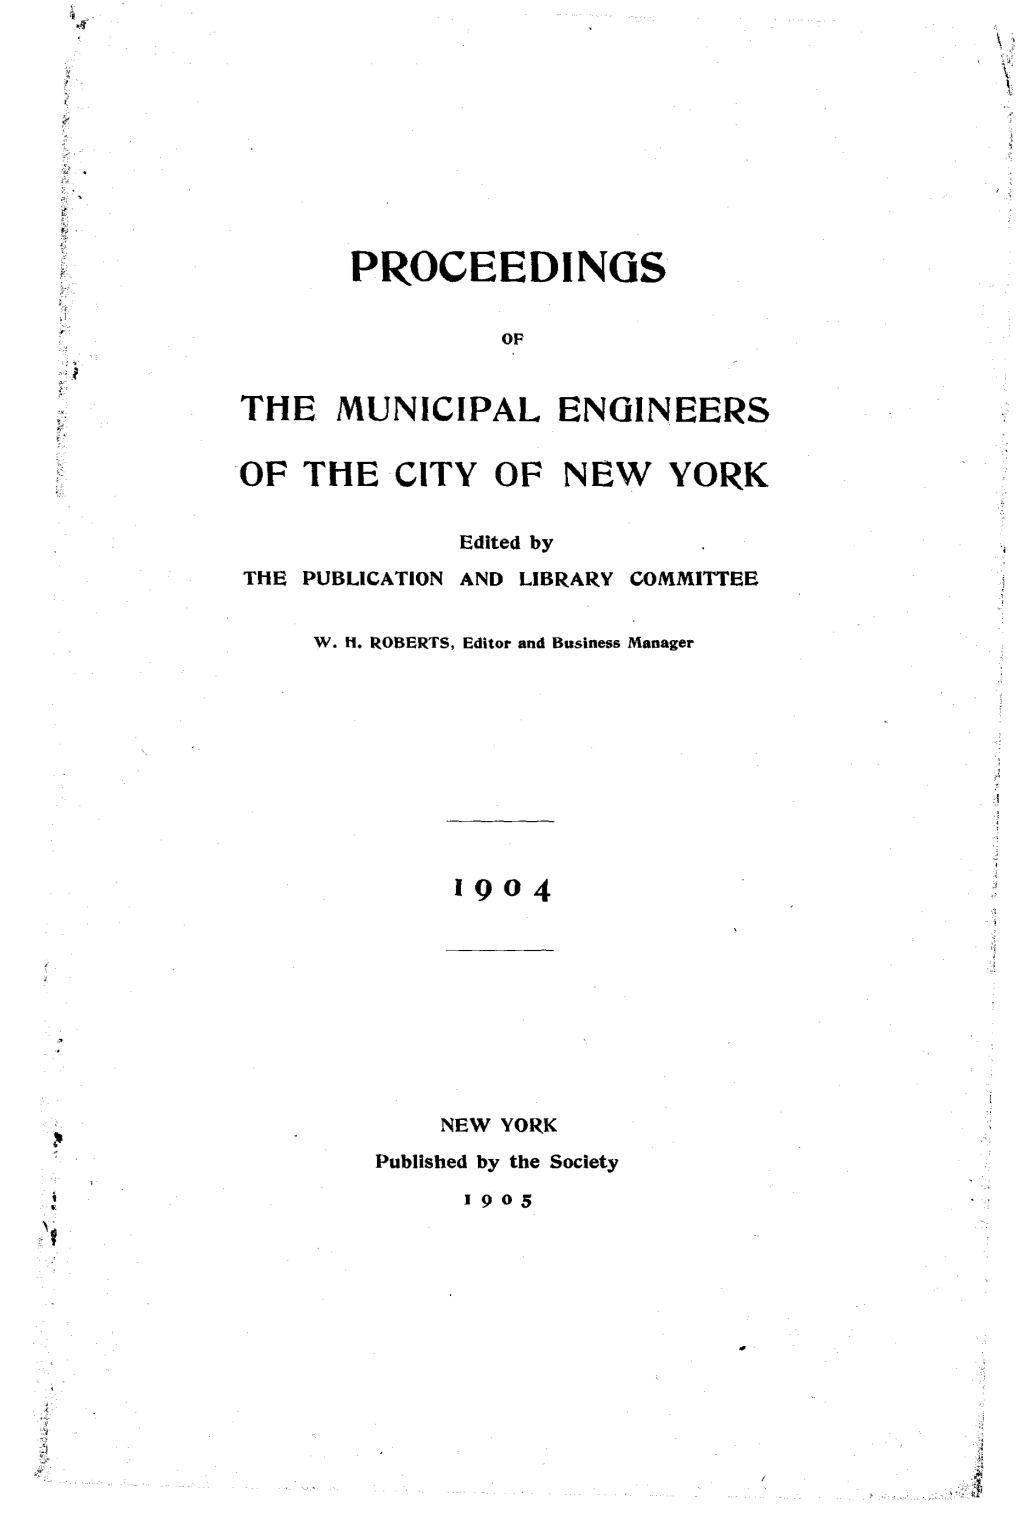 THE MUNICIPAL ENGINEERS I of the CITY of NEW YORK